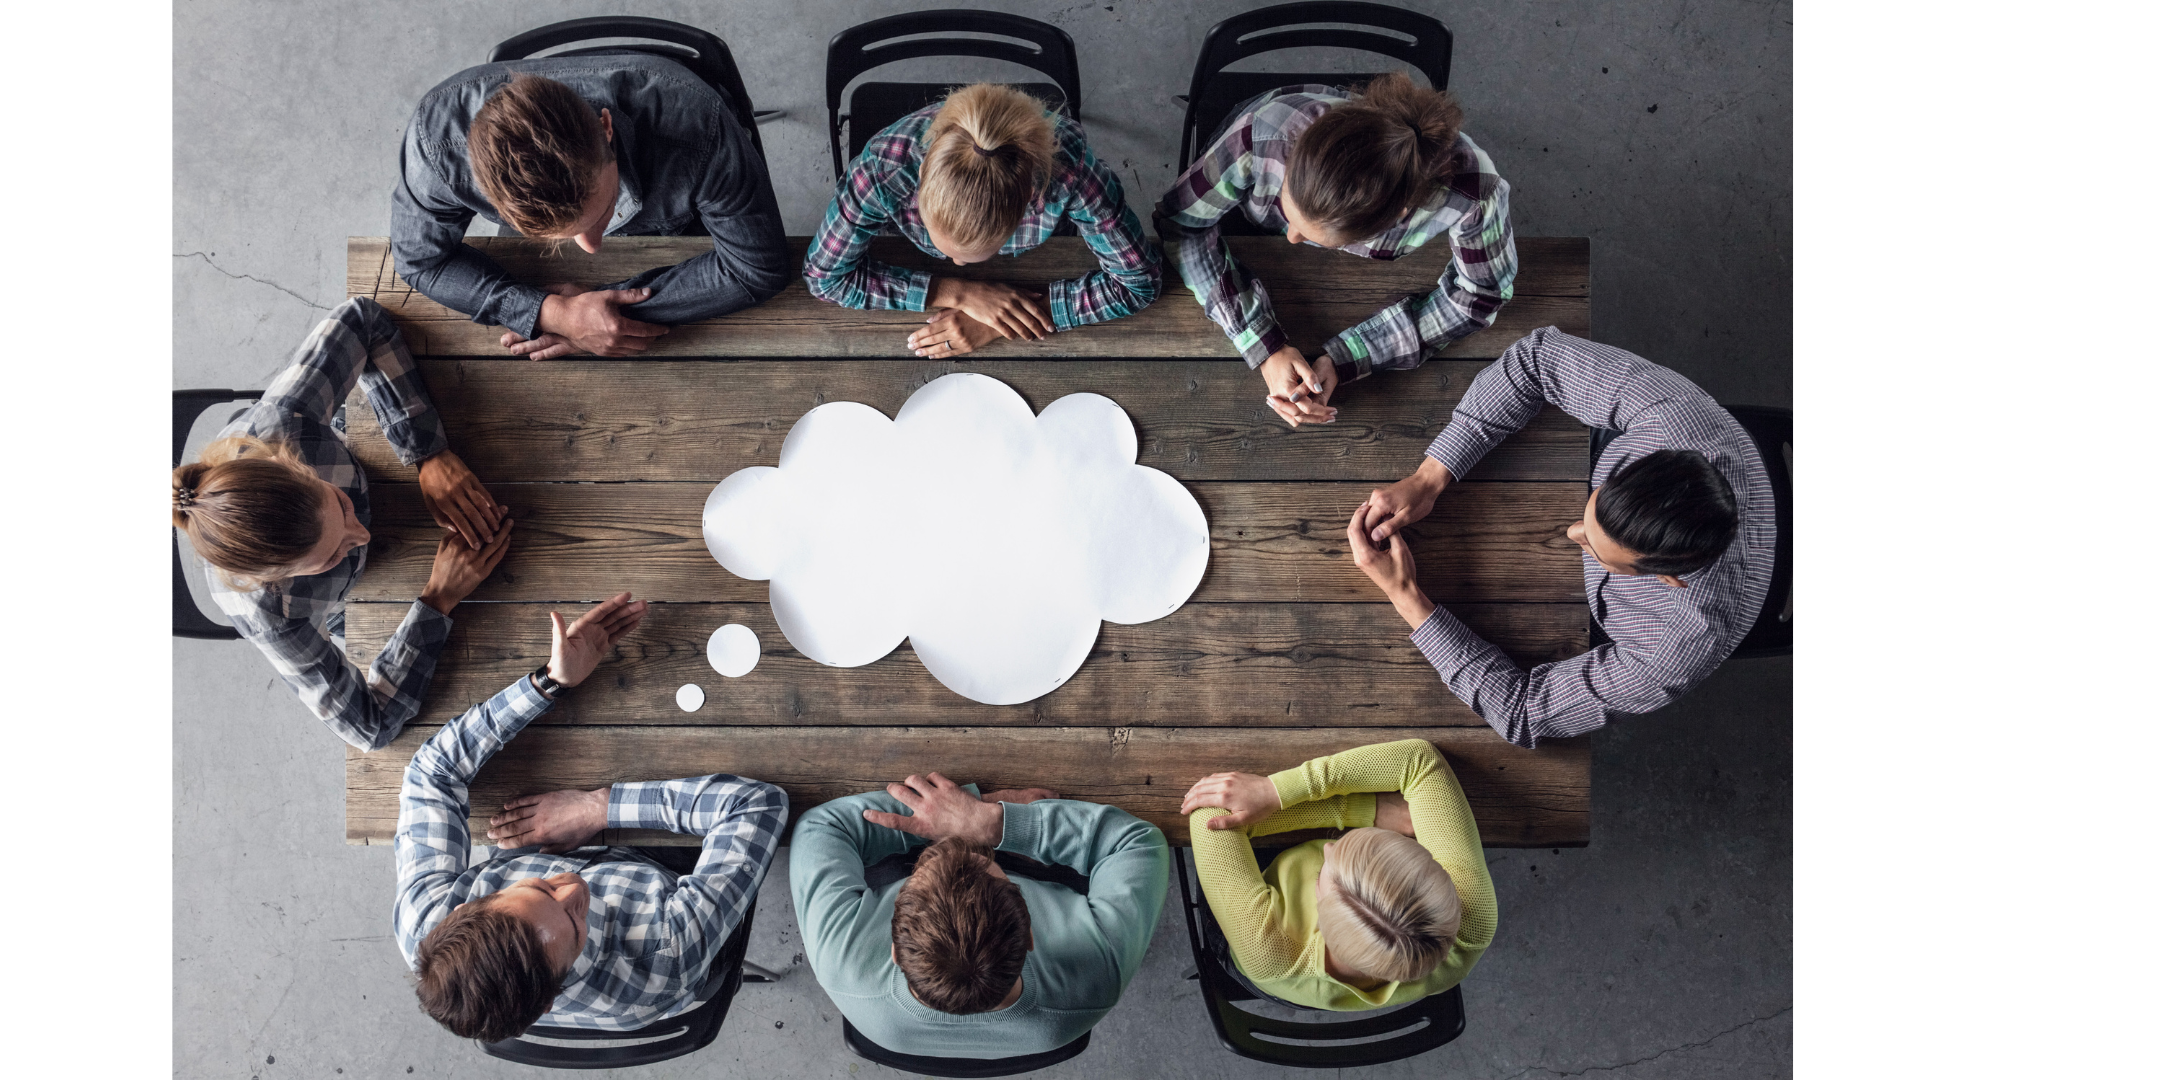 7 people sitting around a large wood desk. There is a large white thinking cloud on the desk